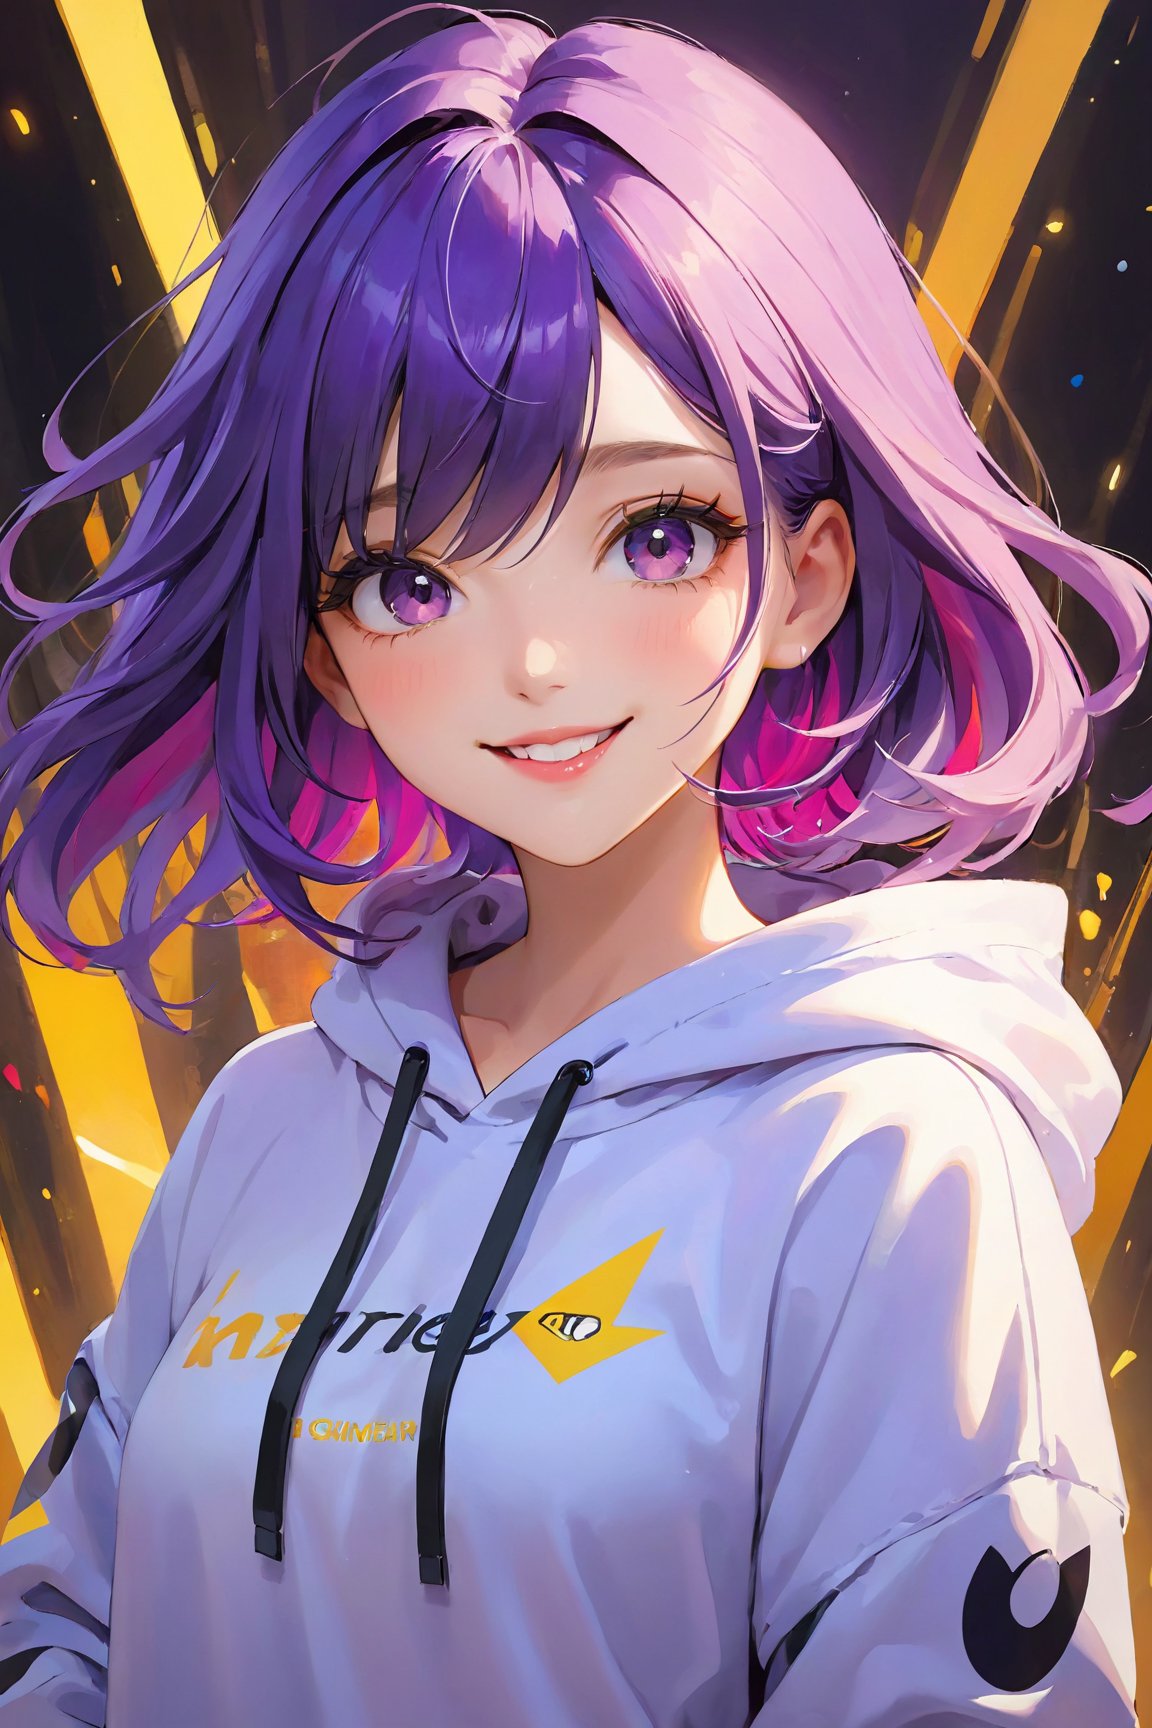 (best quality,4k,8k,highres,masterpiece:1.2),ultra-detailed,beautiful detailed eyes,beautiful detailed lips,extremely detailed eyes and face,longeyelashes,1girl,Graphic Hoodie,Smiling,Purple Hair,Long Hair with bangs,soft and smooth hair,sparkling eyes,playful expression,vibrant colors,expressive features,stylish outfit,artistic background,creative composition,impressive lighting,subtle shadows,high contrast,optimal exposure,attention to details,medium:oil painting,textured brushstrokes,dynamic lines and shapes,fine fabric details,realistic skin tones,pleasing proportions,fashionable style,modern interpretation,artistic flair,high-quality execution,alluring charm,sophisticated and cool vibe,sense of confidence and joy,seamless integration of elements,lively atmosphere,color harmony and balance,eye-catching artwork,unique and captivating visual experience,memorable and impactful piece.